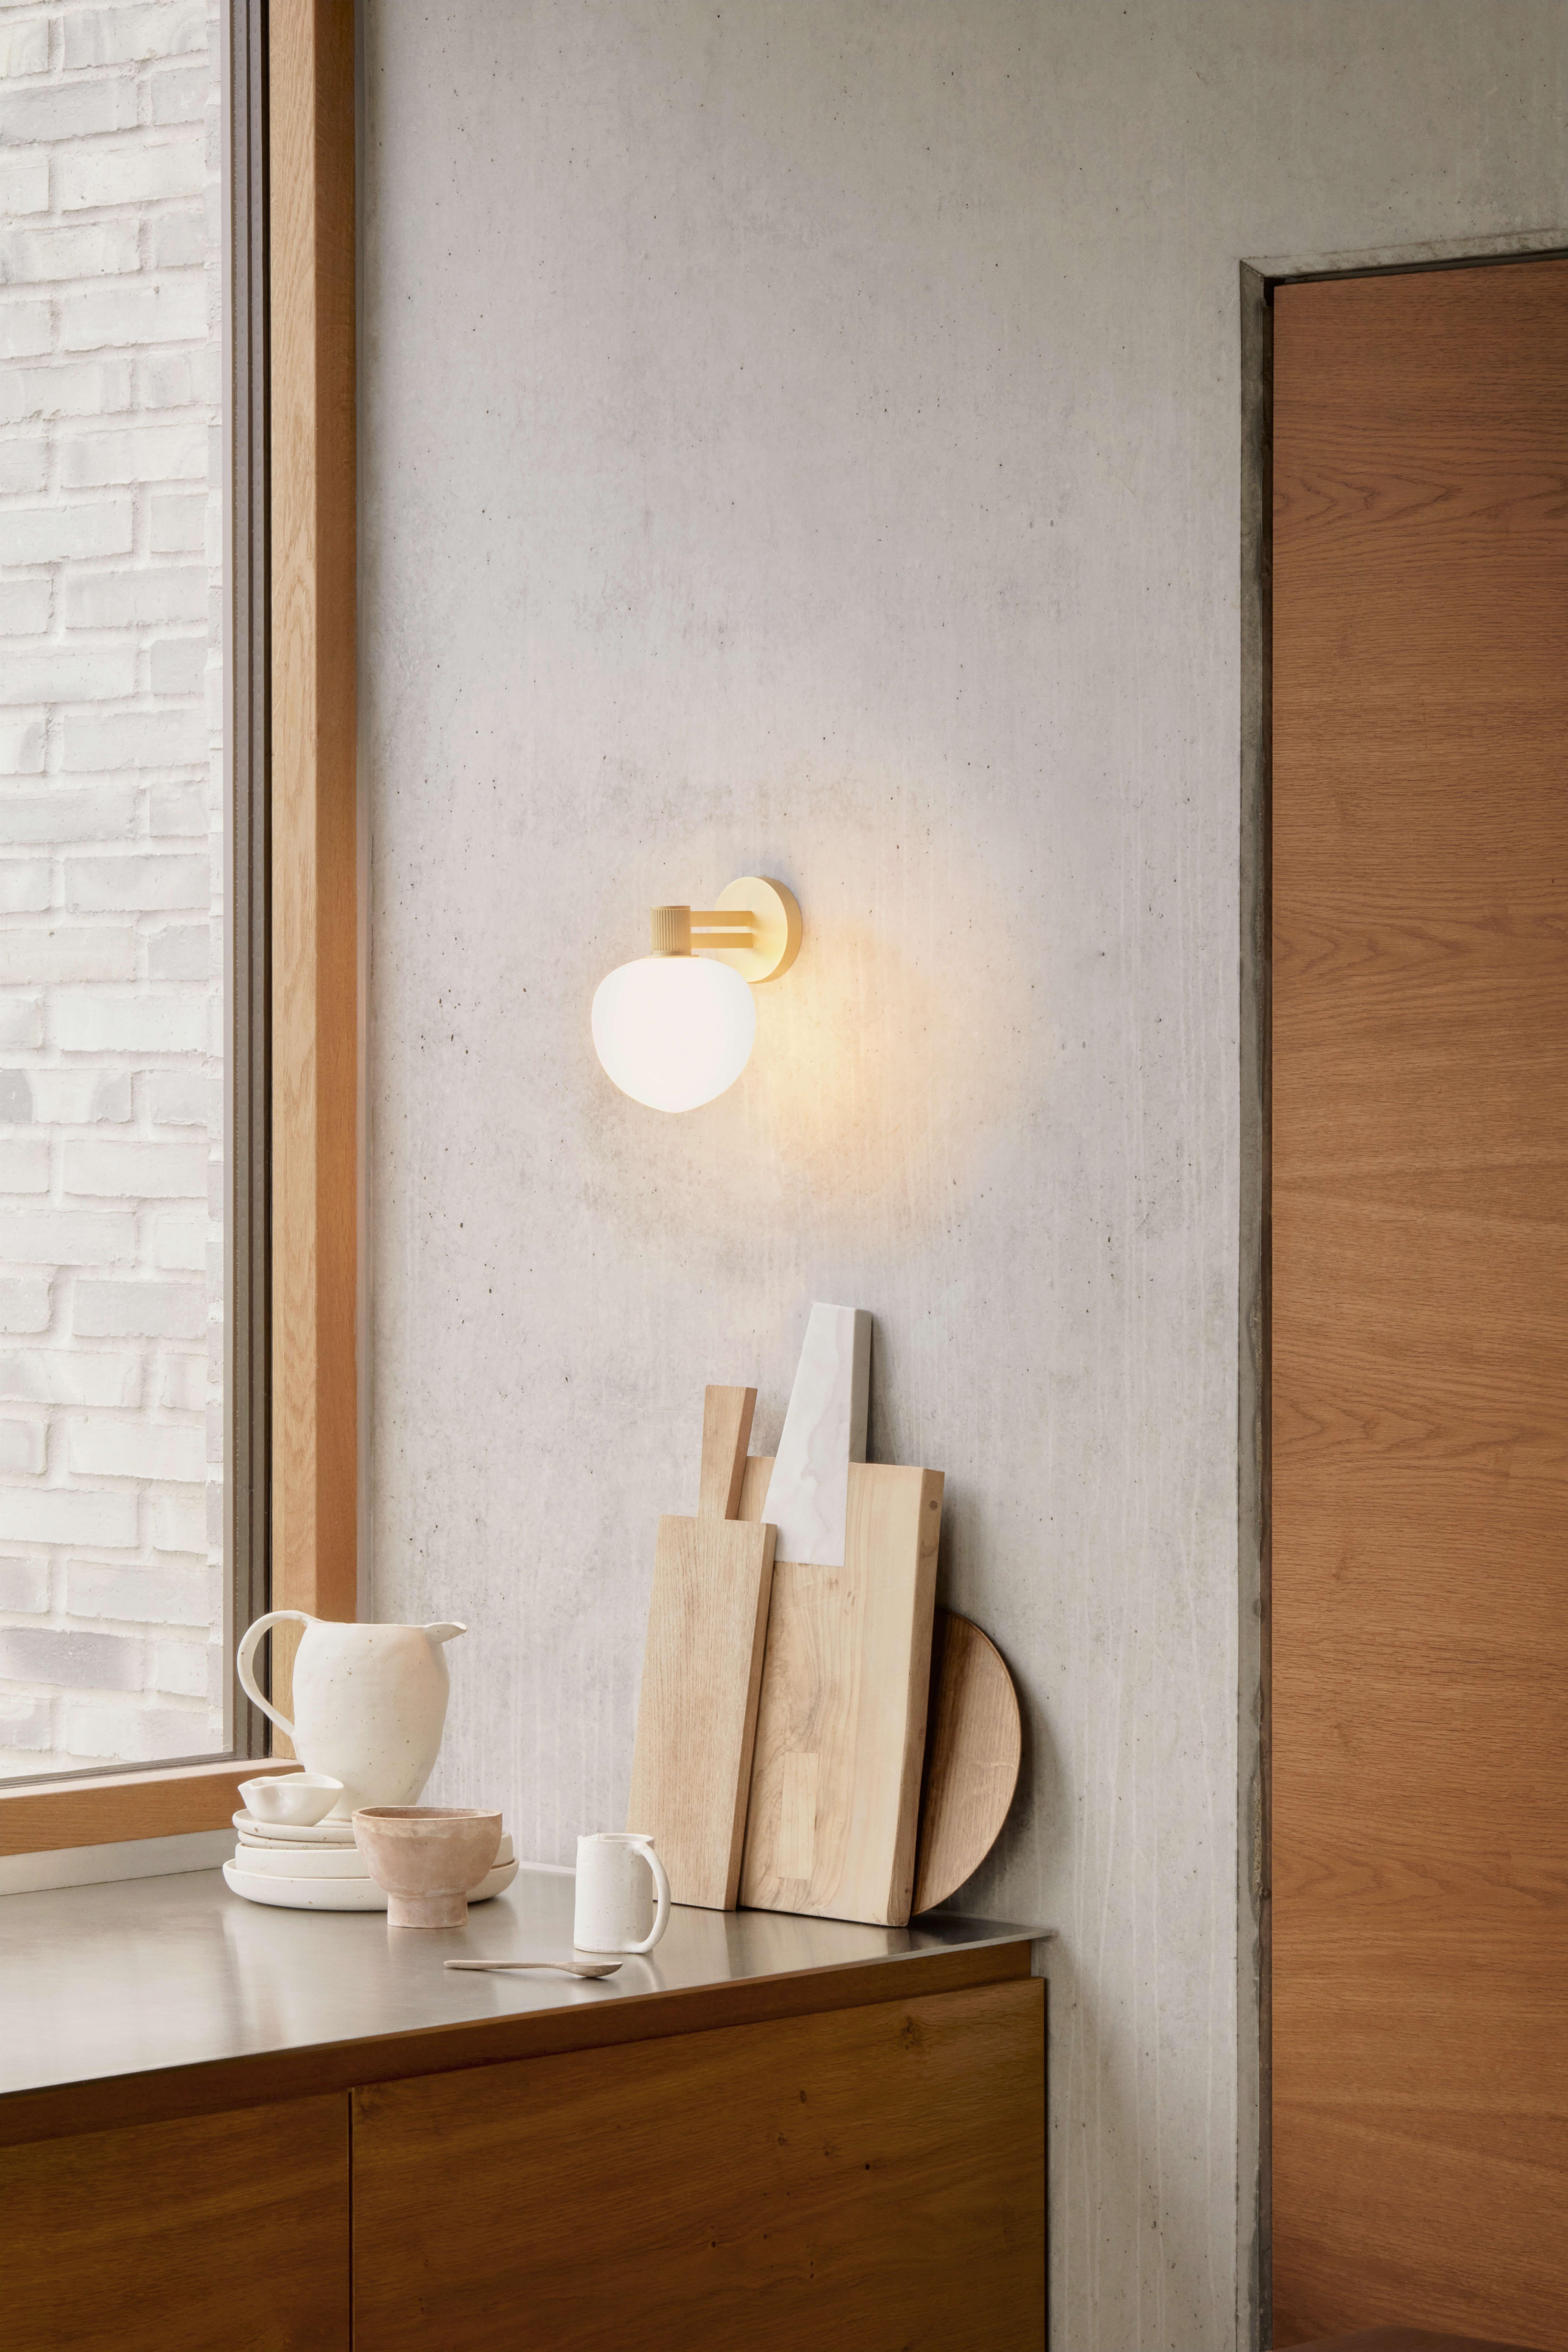 Memoir 120 Wall Lamp signed by GamFratesi for LYFA.

DIMENSIONS
W 16 x D 12 x H 17.8 cm

COLOURS
Black or brass

2,5 m black/white plastic cord with switch
Socket: G9
Max wattage: 28 Watt
Energy class: The luminaire is compatible with bulbs of